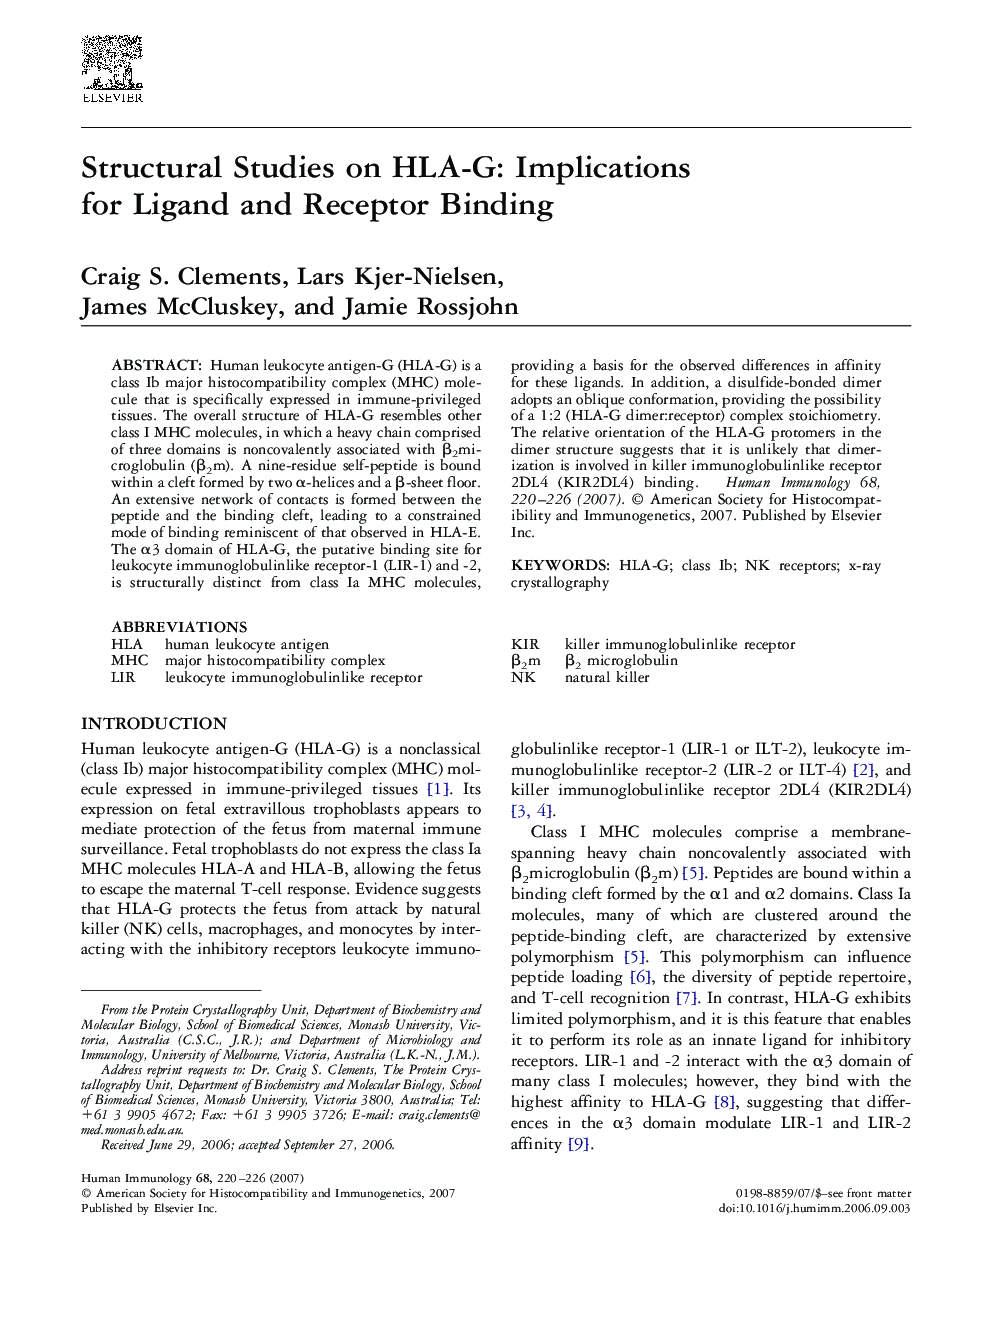 Structural Studies on HLA-G: Implications for Ligand and Receptor Binding